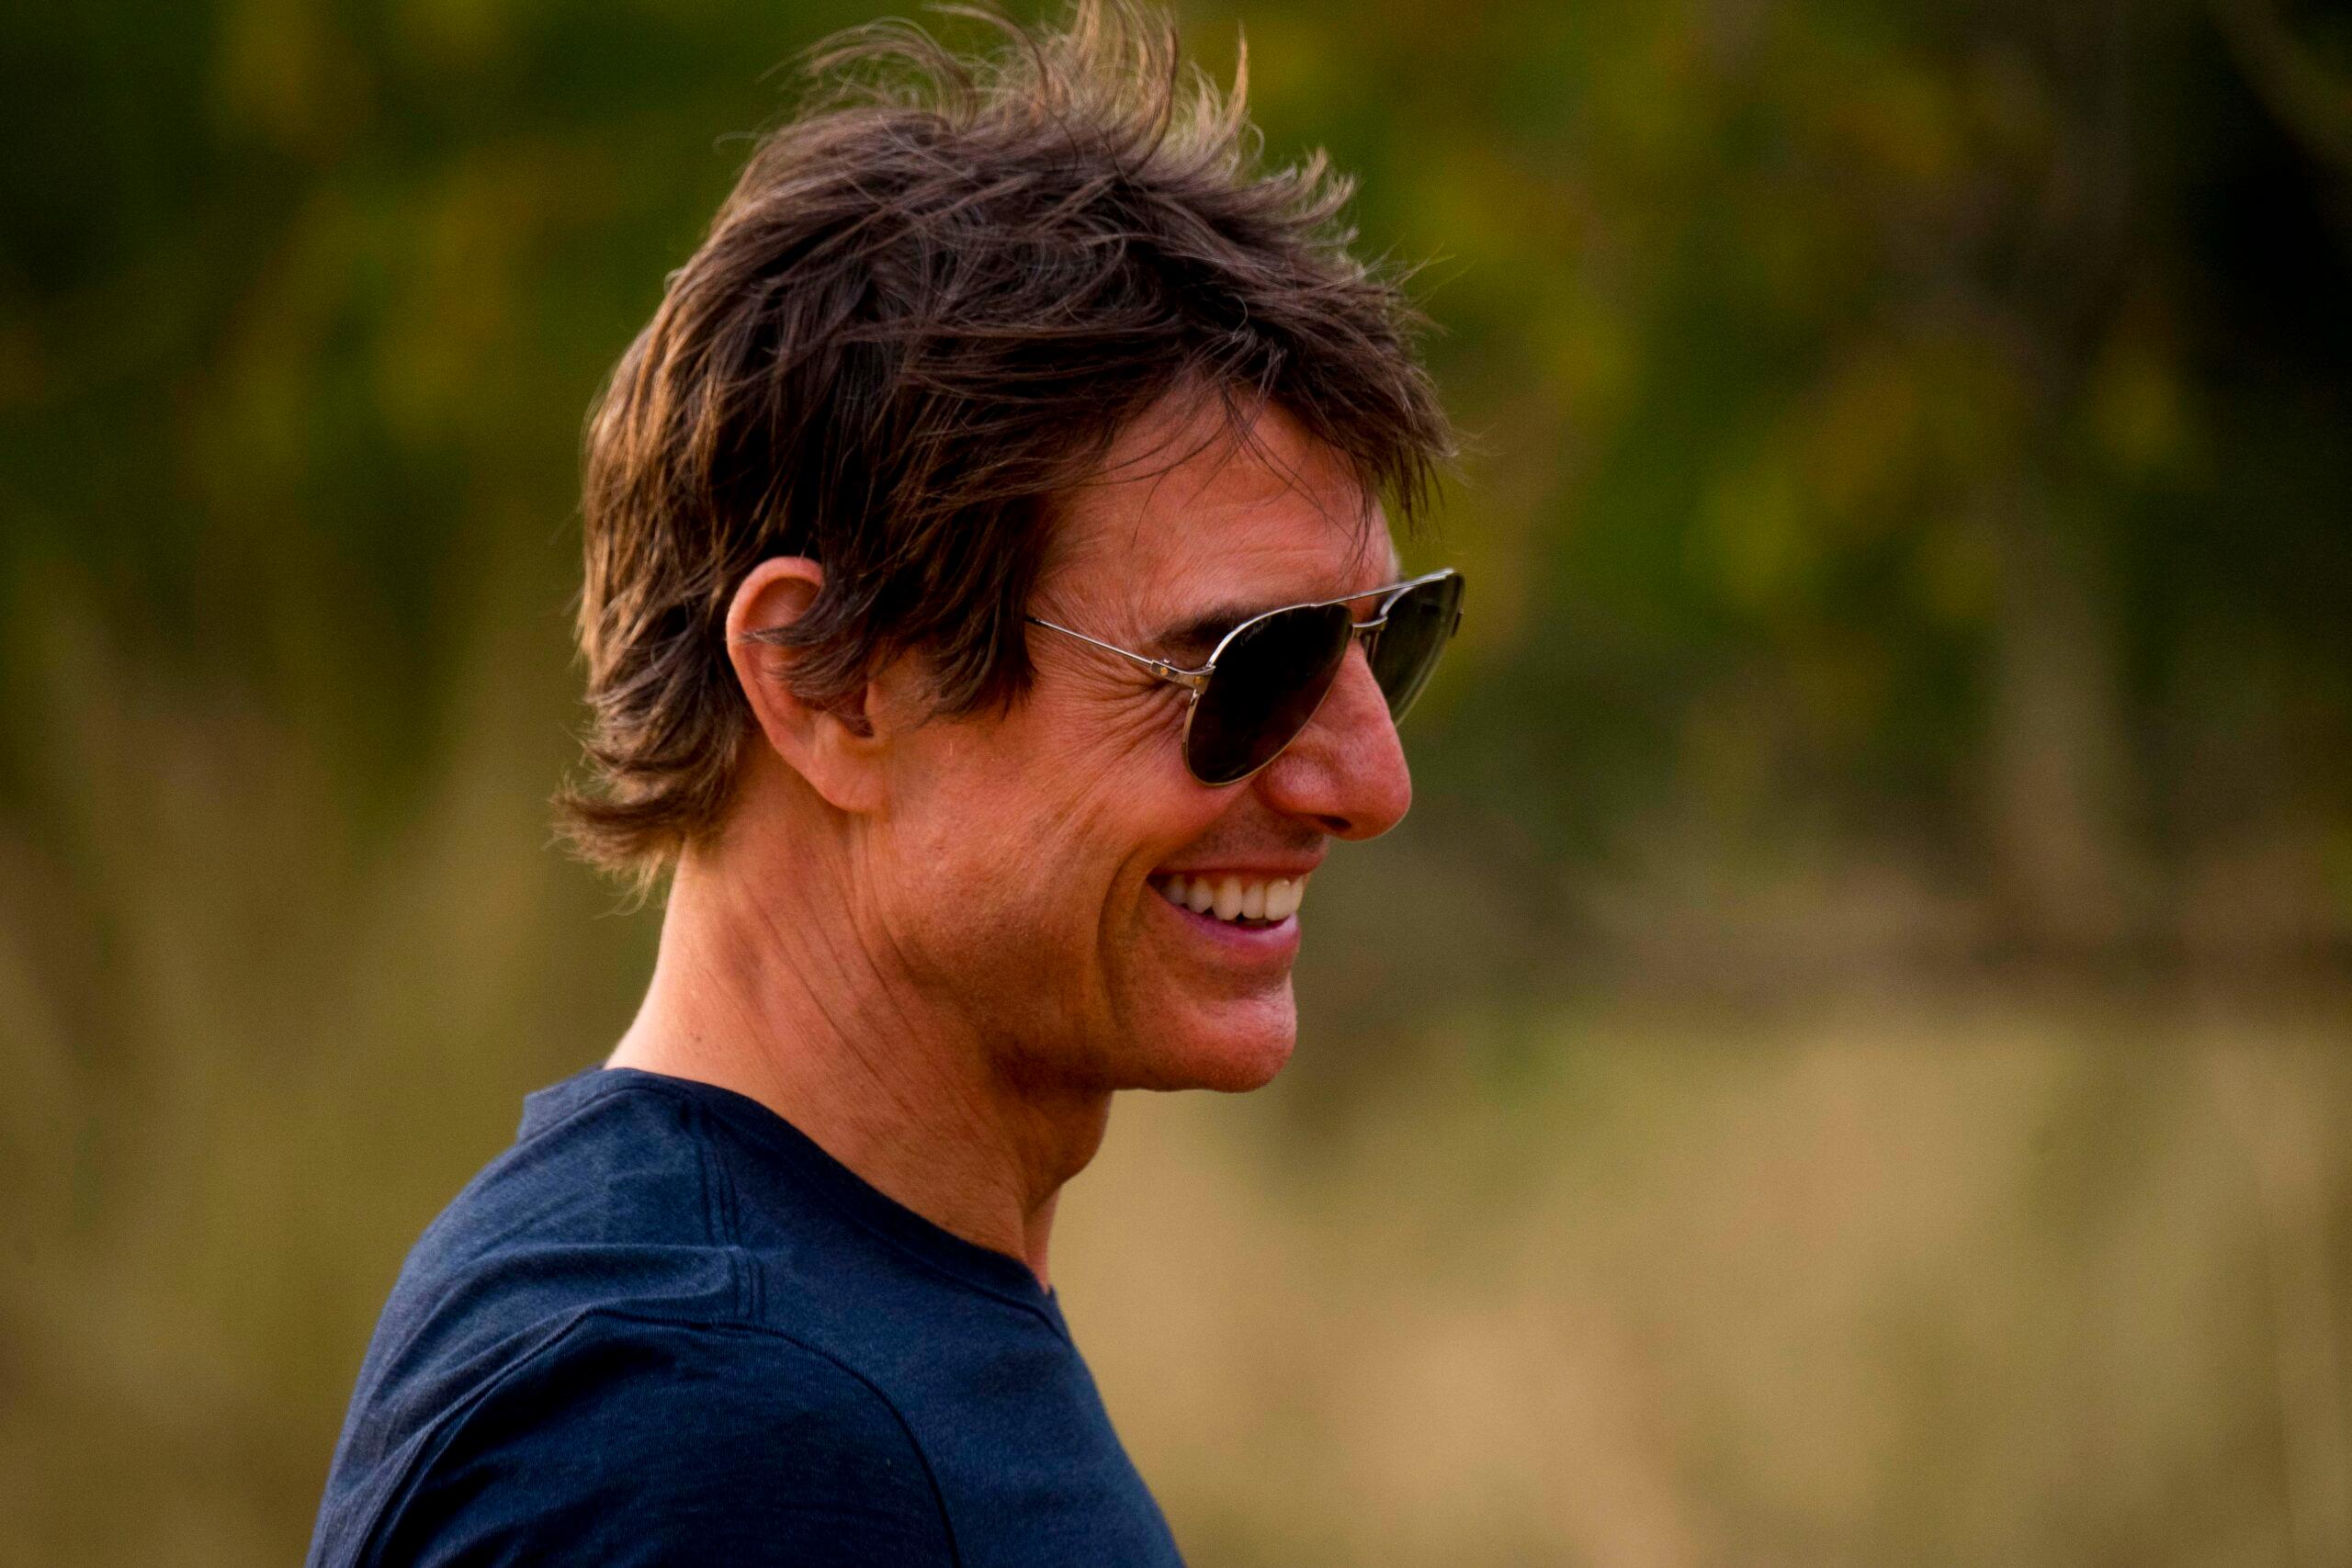 Impressed Tom Cruise reacts to being serenaded with the Top Gun theme song by fans in South Africa